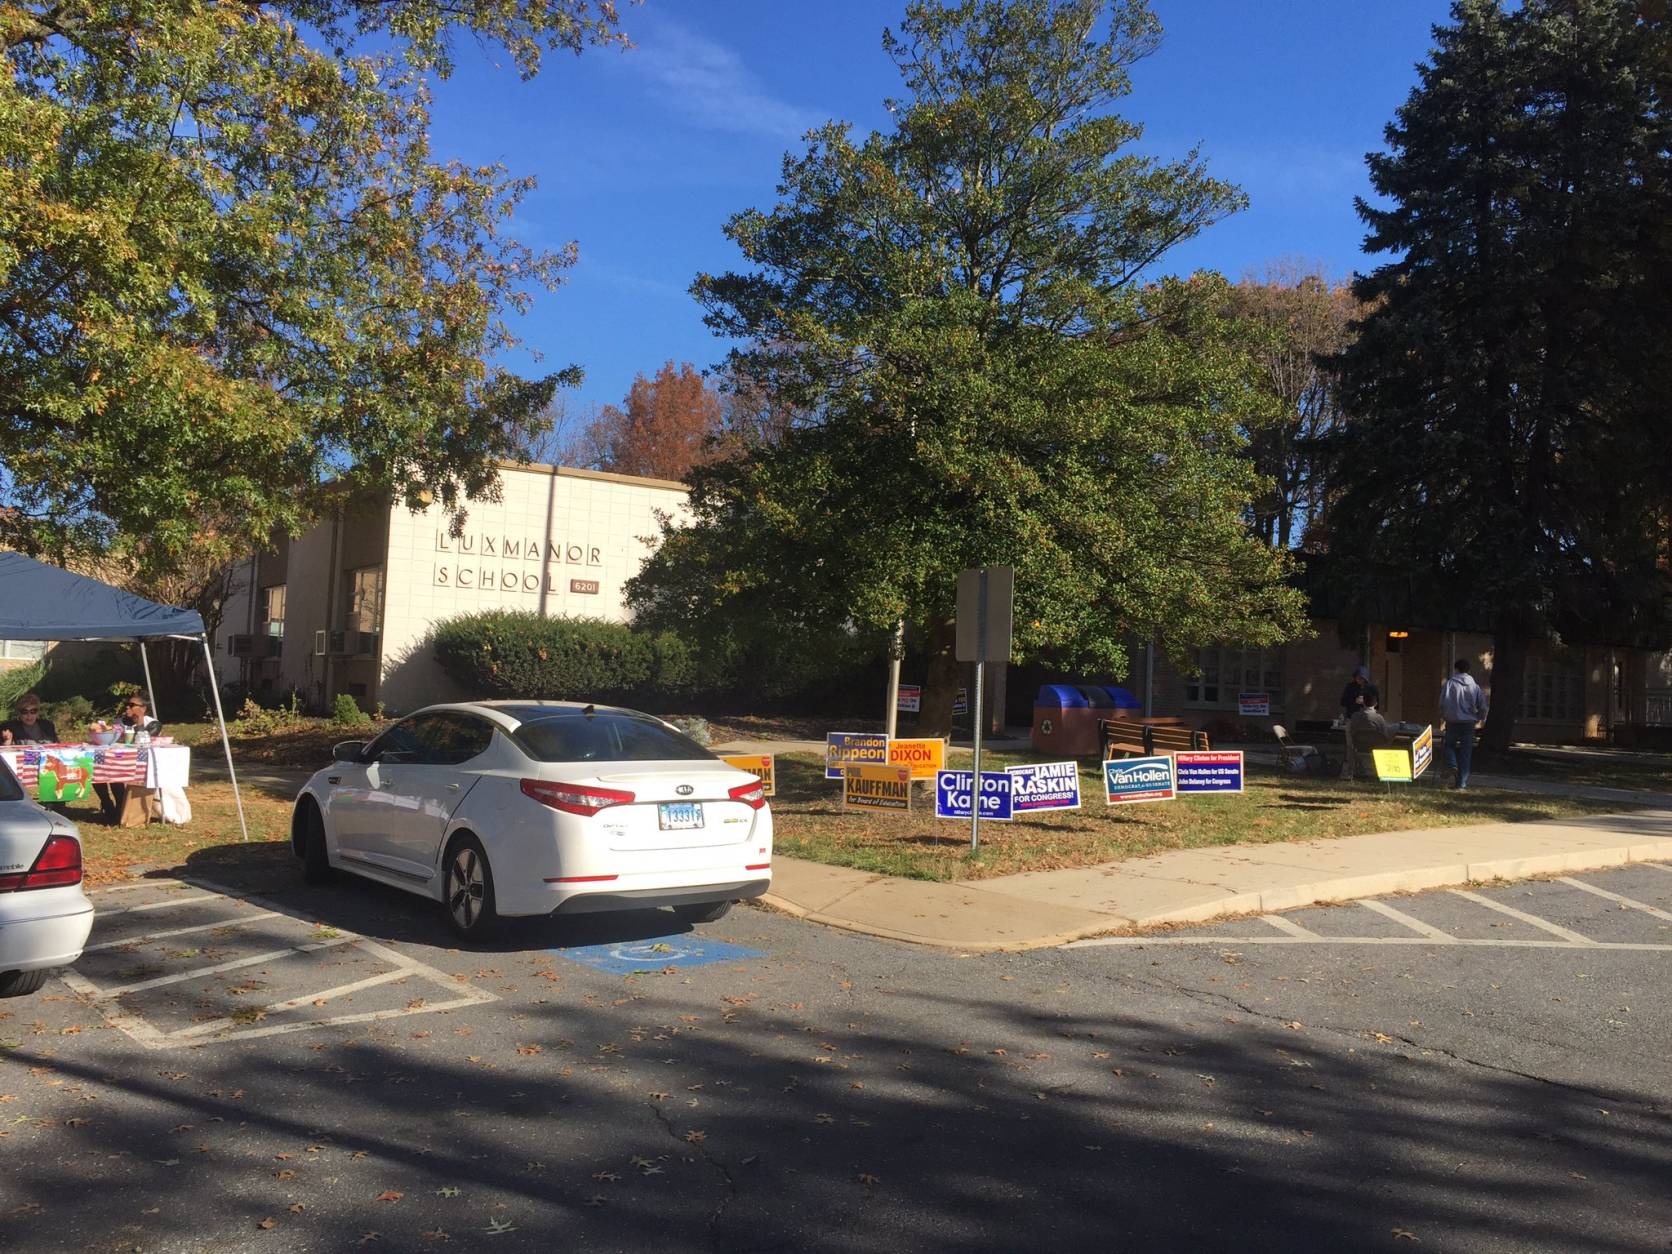 For voters waiting to cast their ballots near Rockville's Luxmanor Elementary school, the whole process is taking about 15 minutes, WTOP's Mike Murillo reports. (WTOP/Mike Murillo)